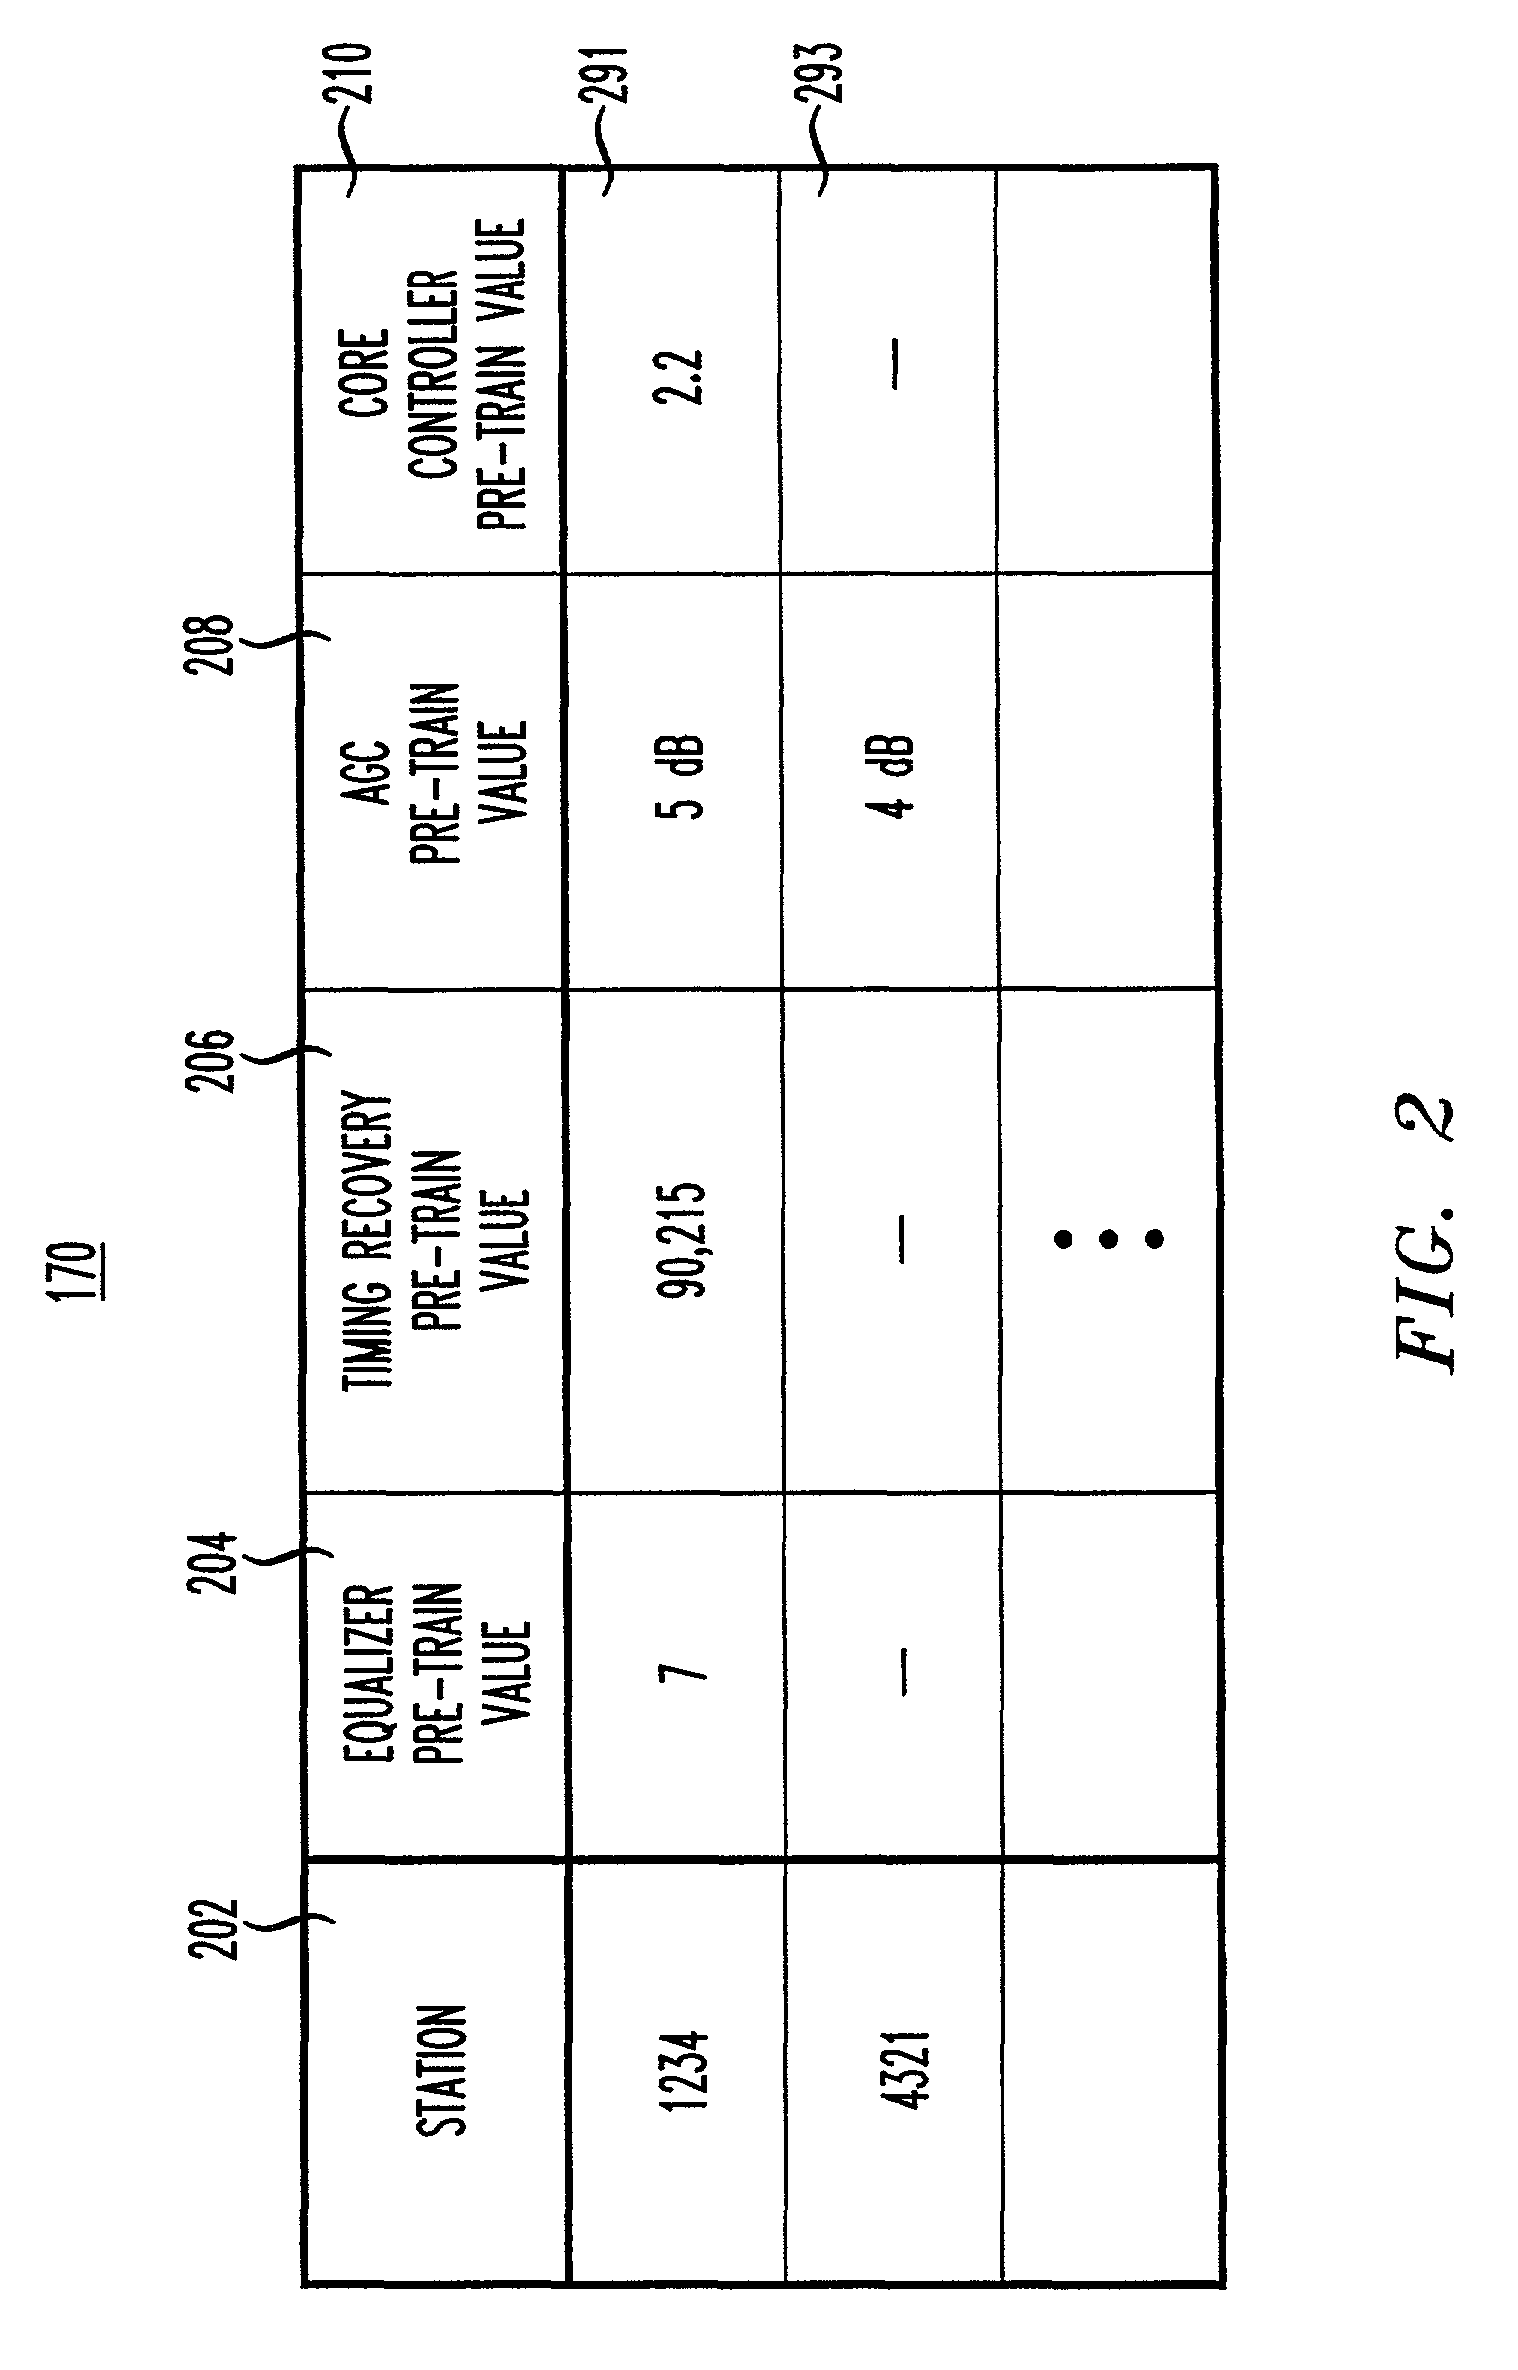 Auxiliary coding for home networking communication system